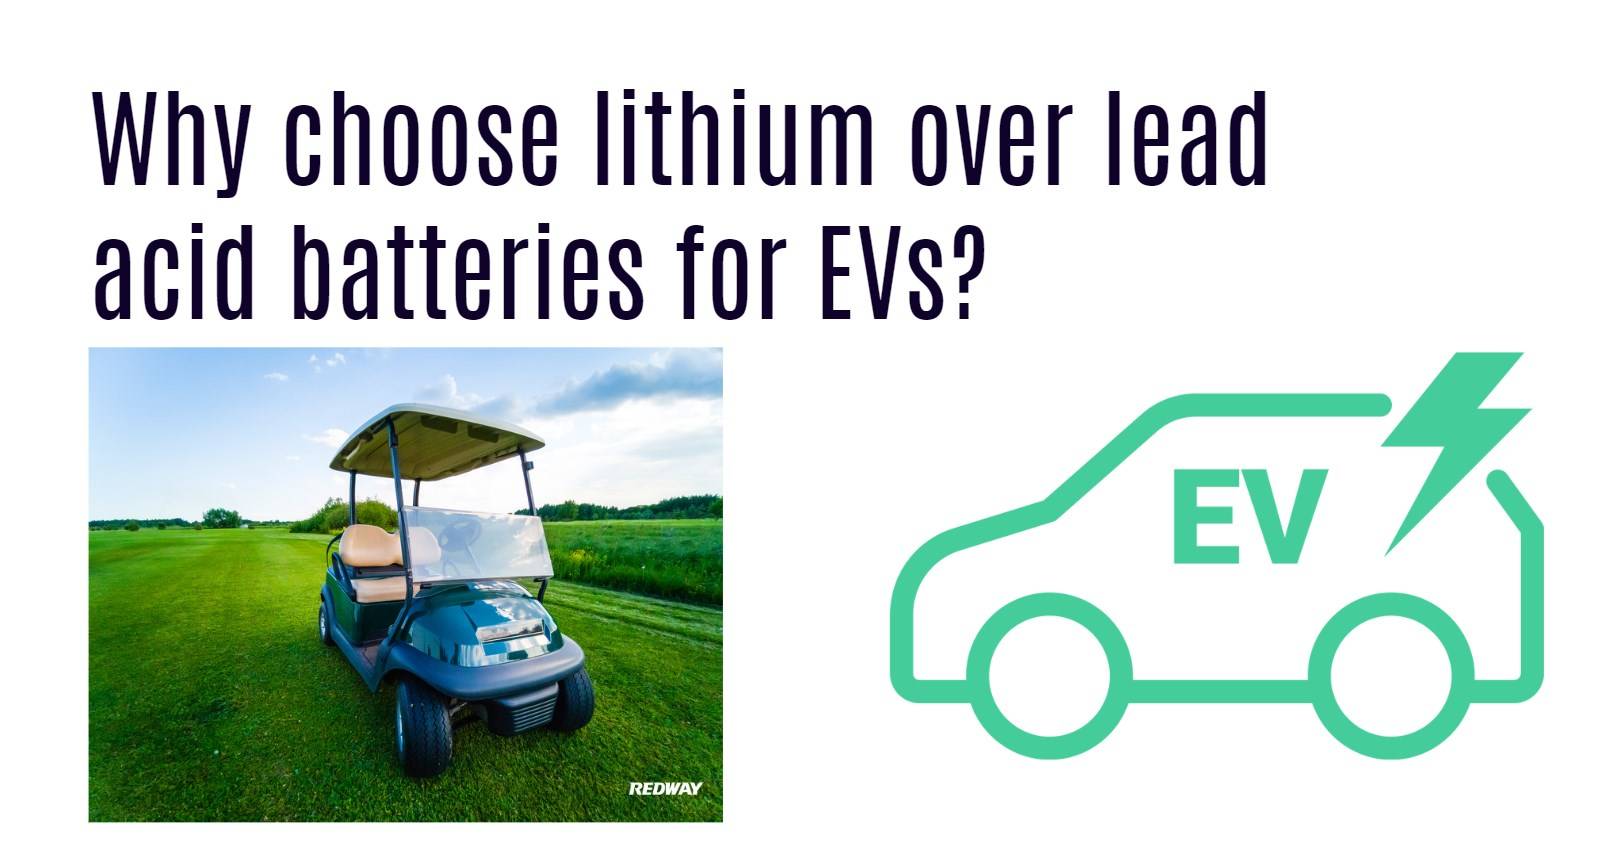 What are the features of Ionic Lithium batteries available for purchase?